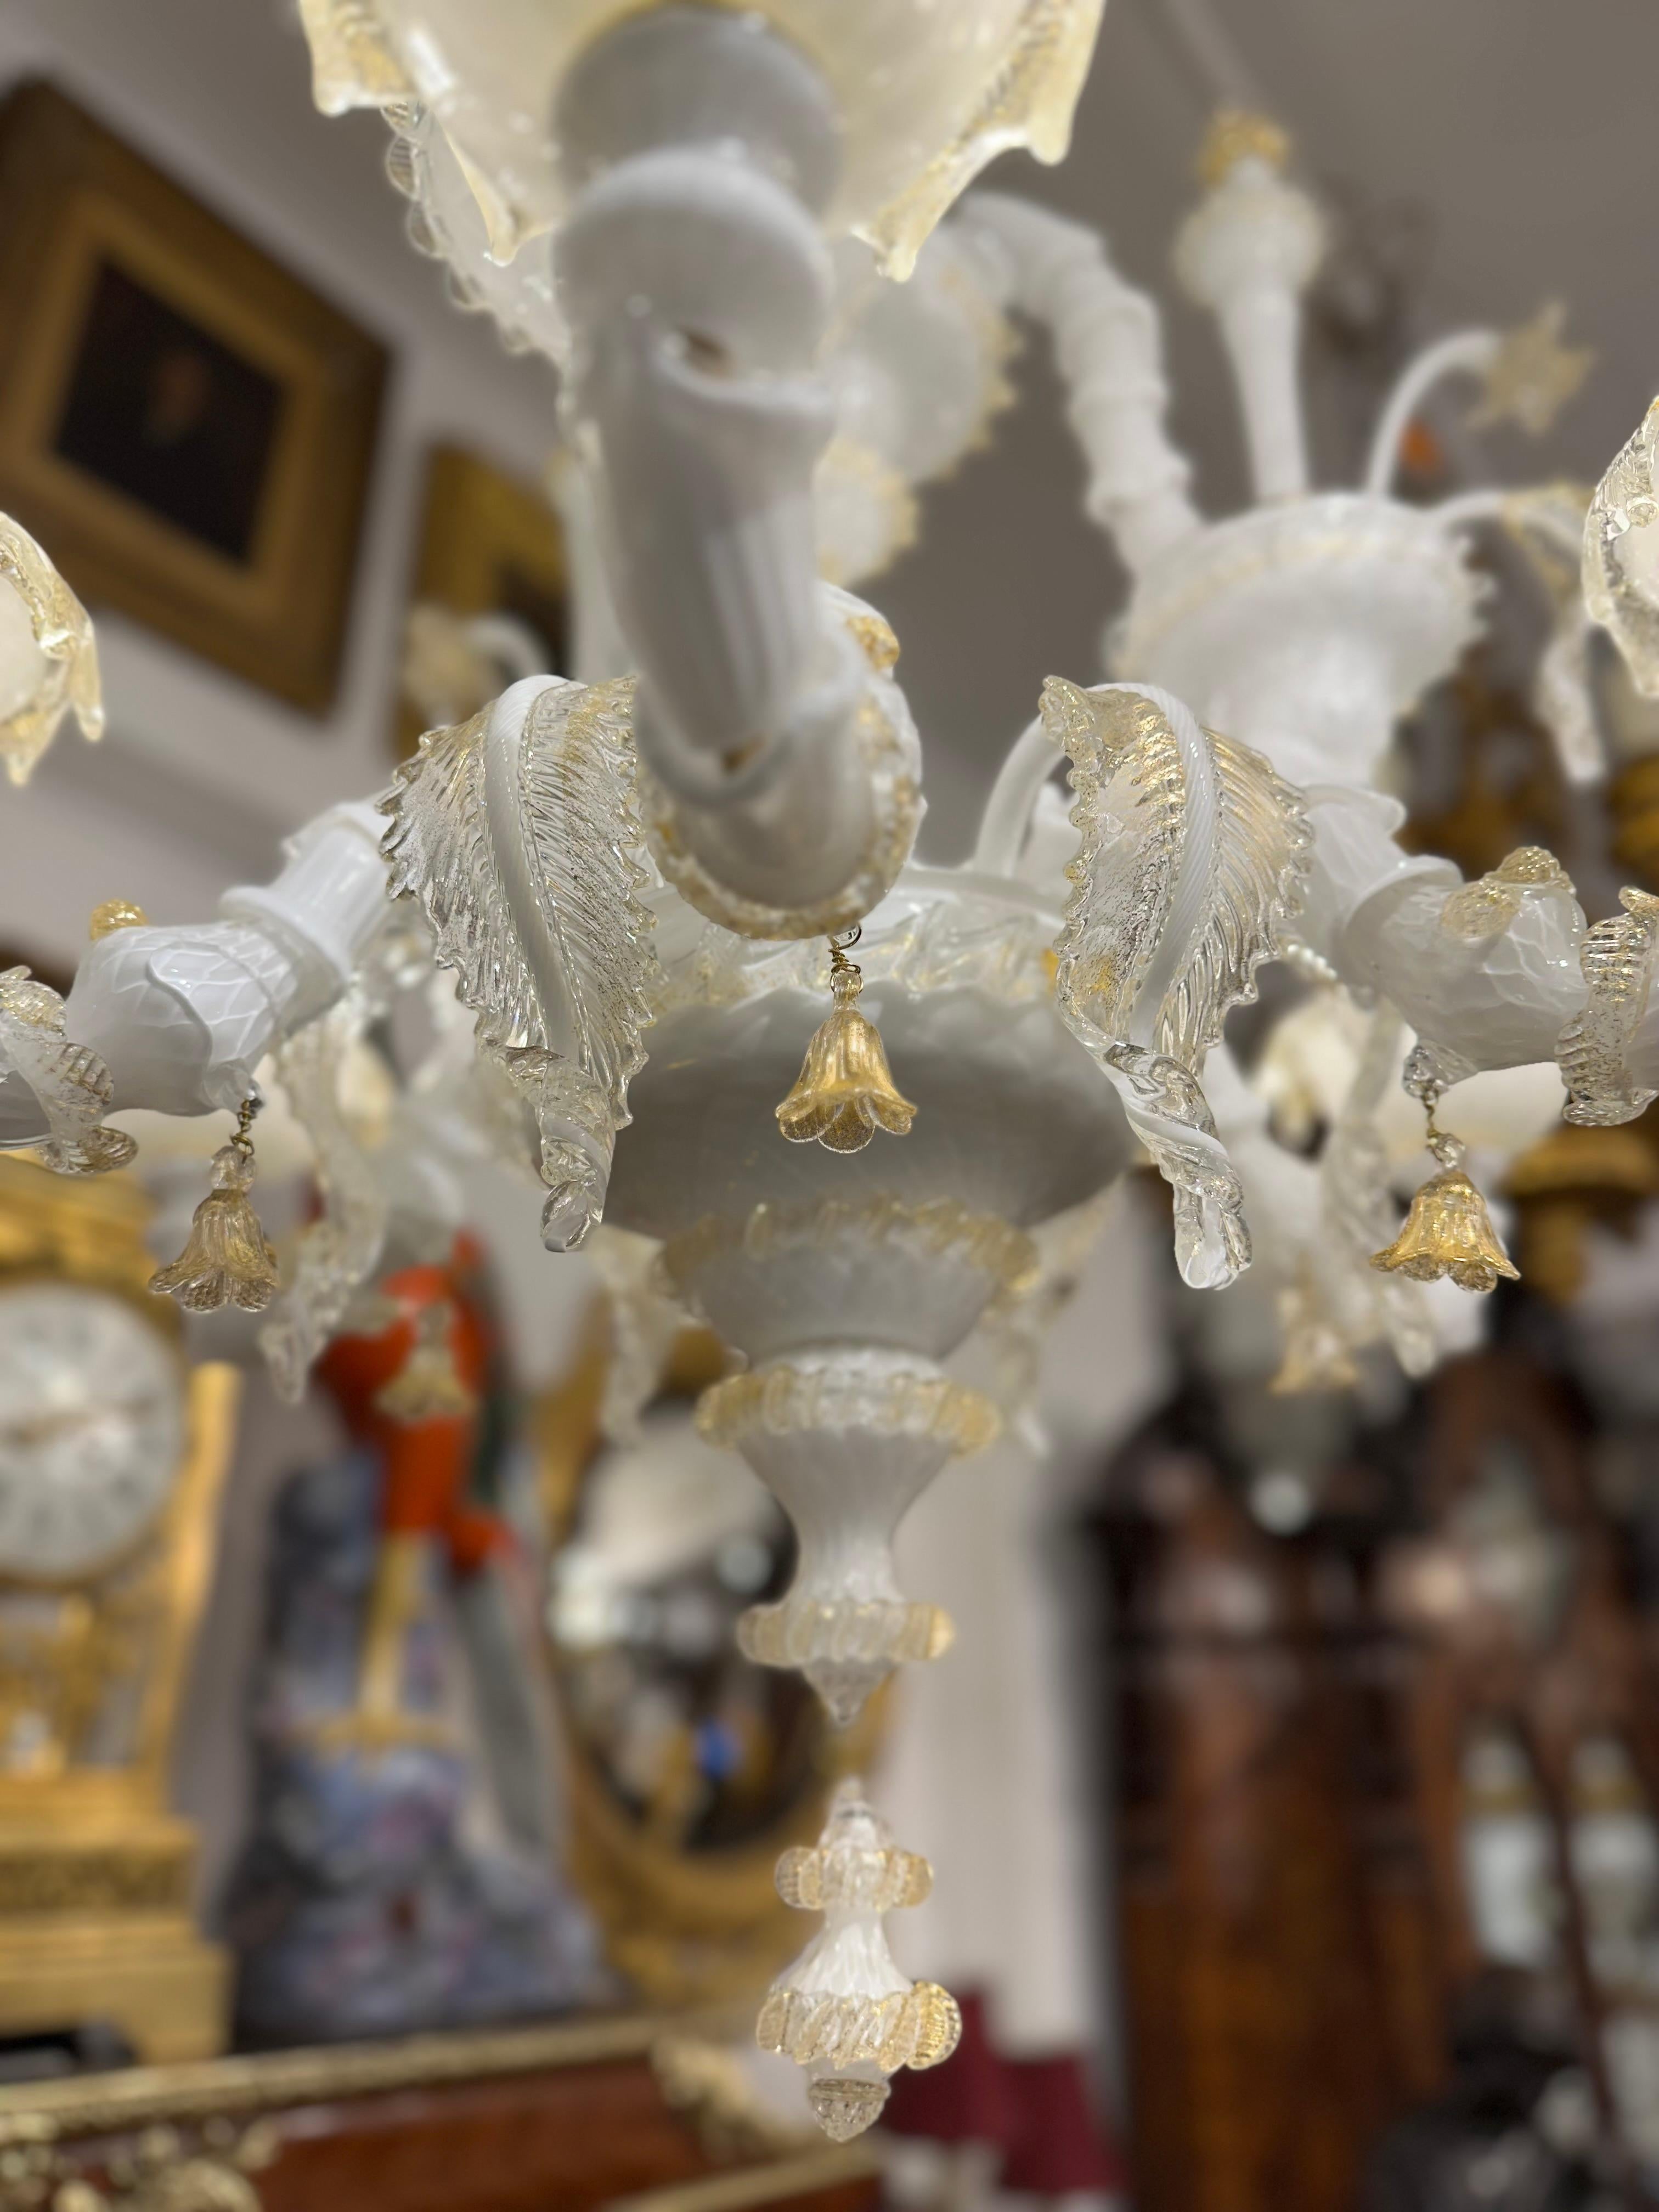 A stunning murano chandelier in white and gold, skilfully handblown in Italy. Murano glass is world renown, with a long history spanning centuries. Popular with aristocrats, celebrities and interior designers throughout the world they have a unique